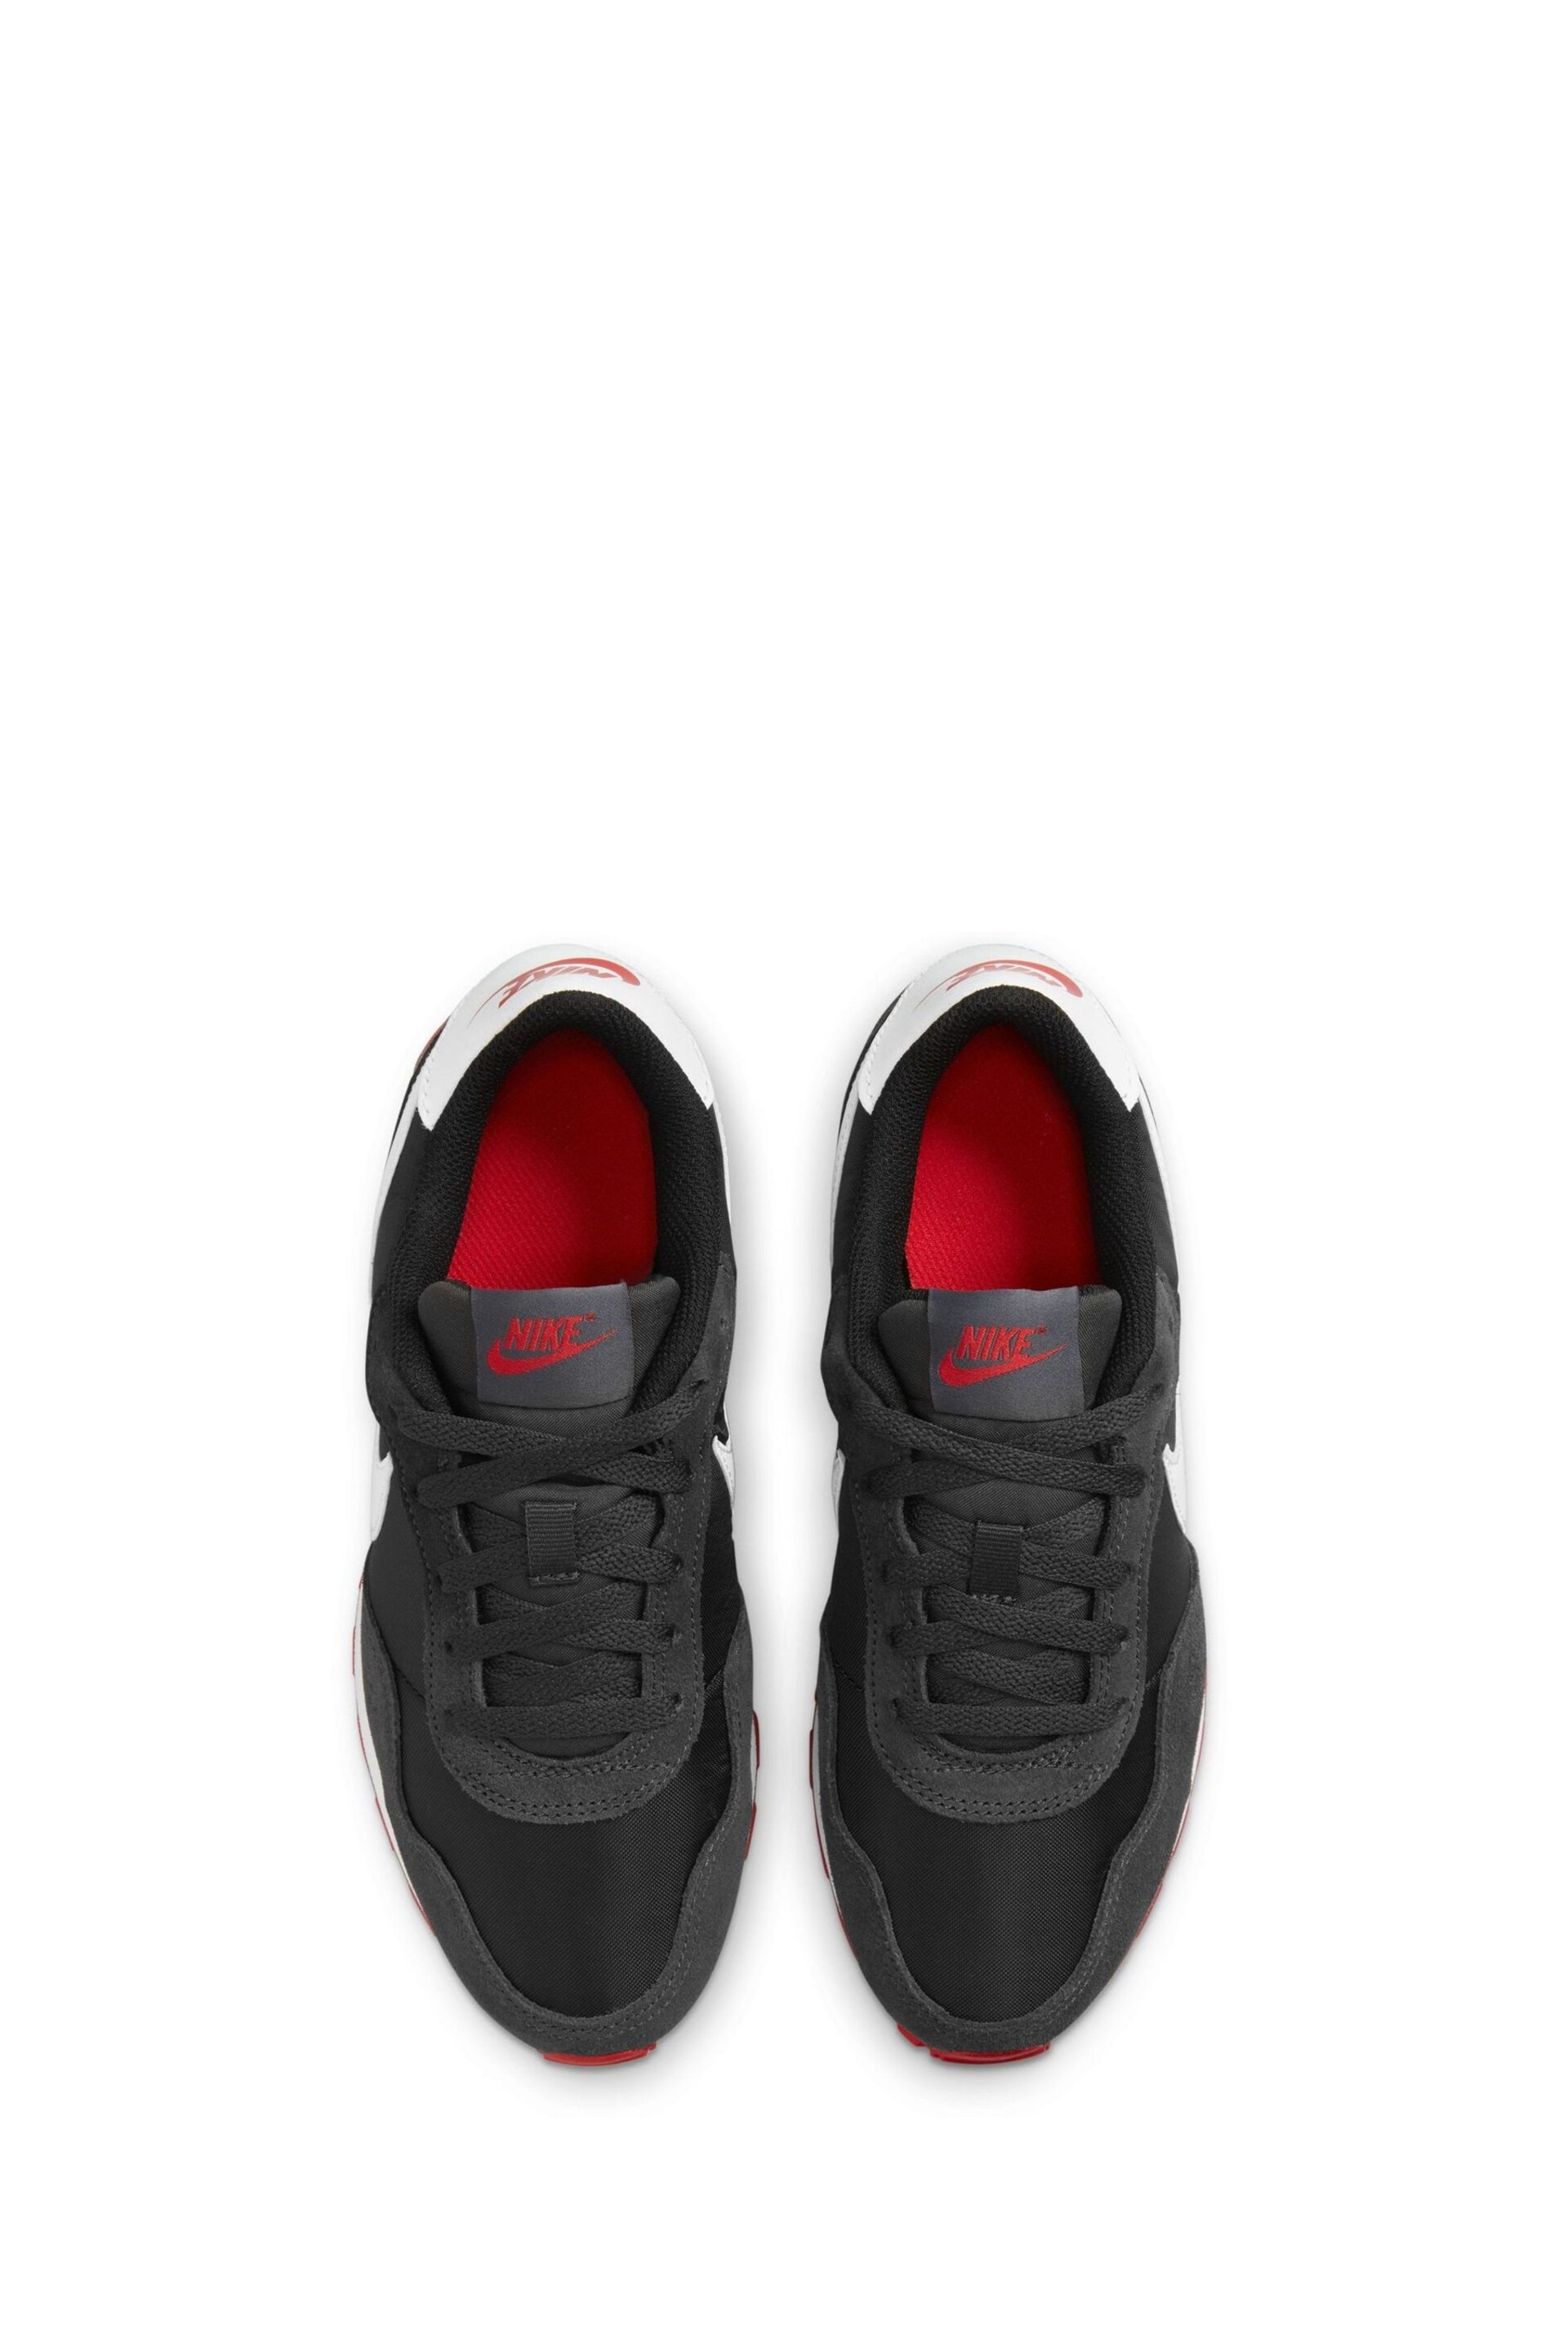 Nike Black/Red Youth MD Valiant Trainers - Image 7 of 10